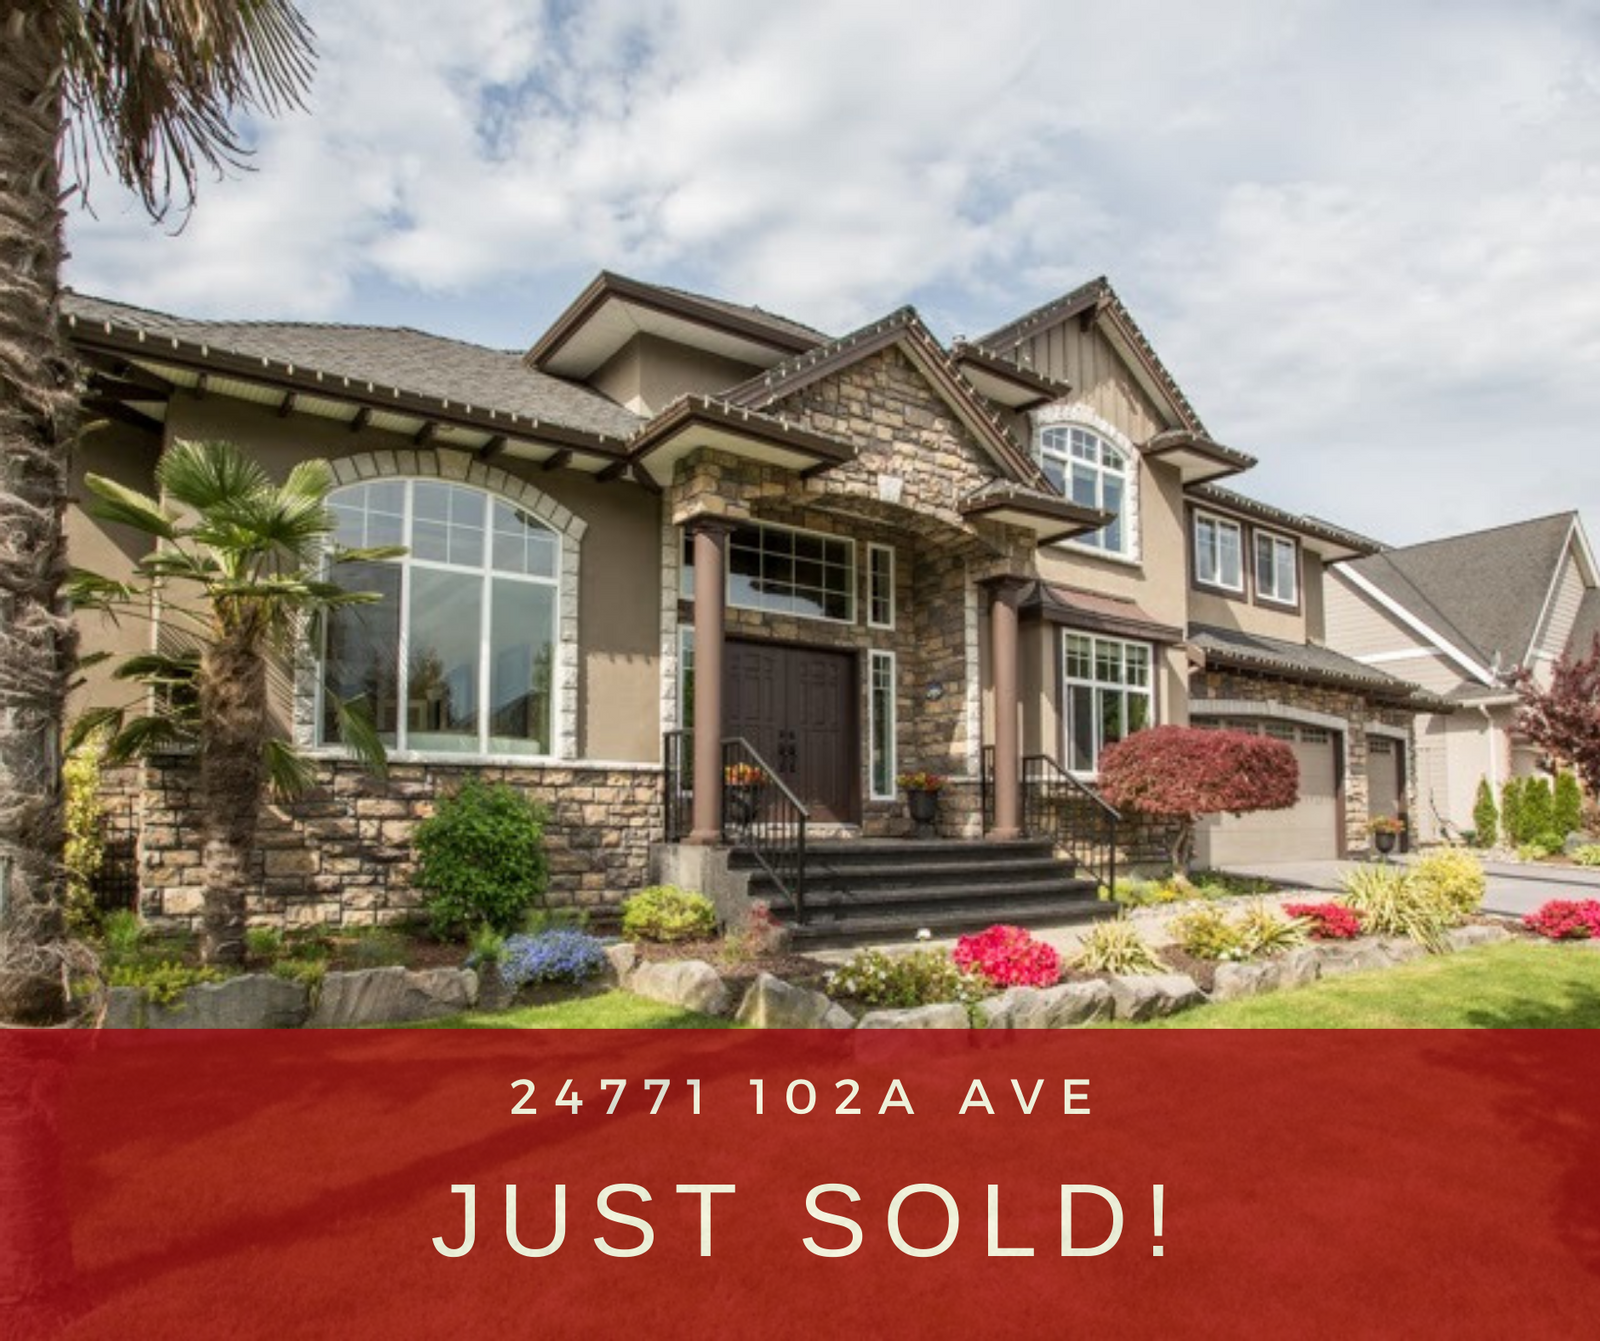 SOLD! 24771 102A Ave, Maple Ridge